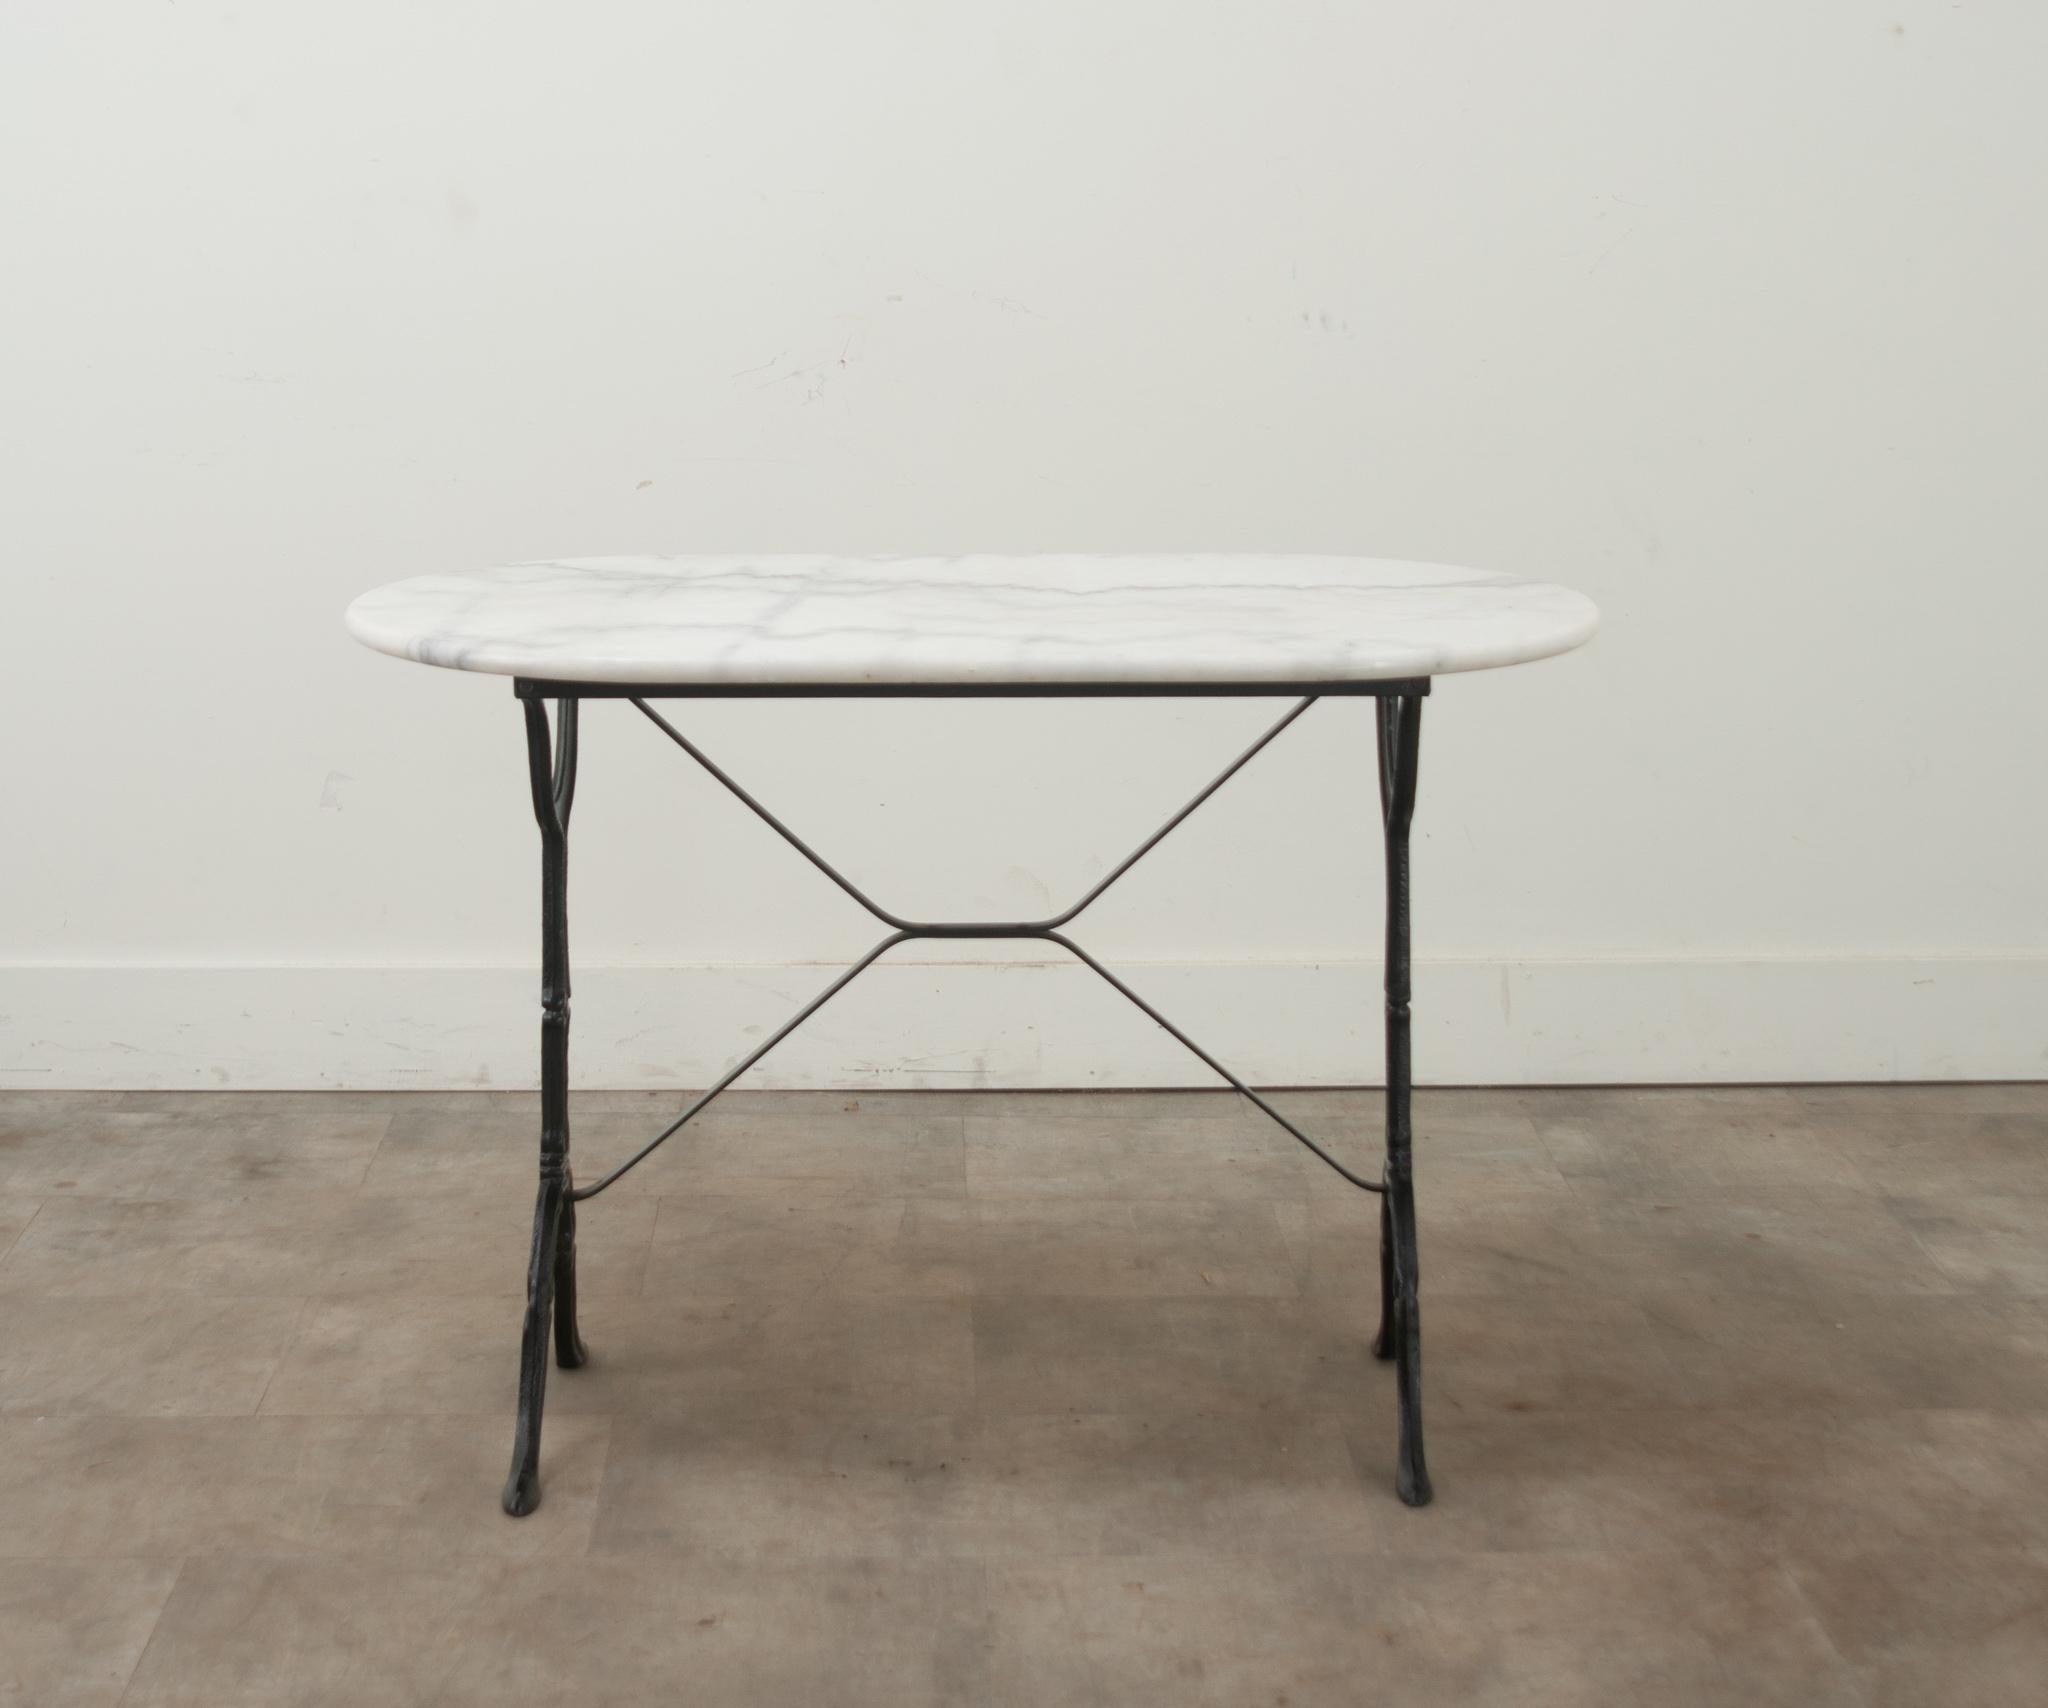 A classically styled French bistro table featuring a white capsule-shaped marble top over a cast iron base. This petite dining table shows wear consistent with age and use. Be sure to view the detailed images to see the current condition. 